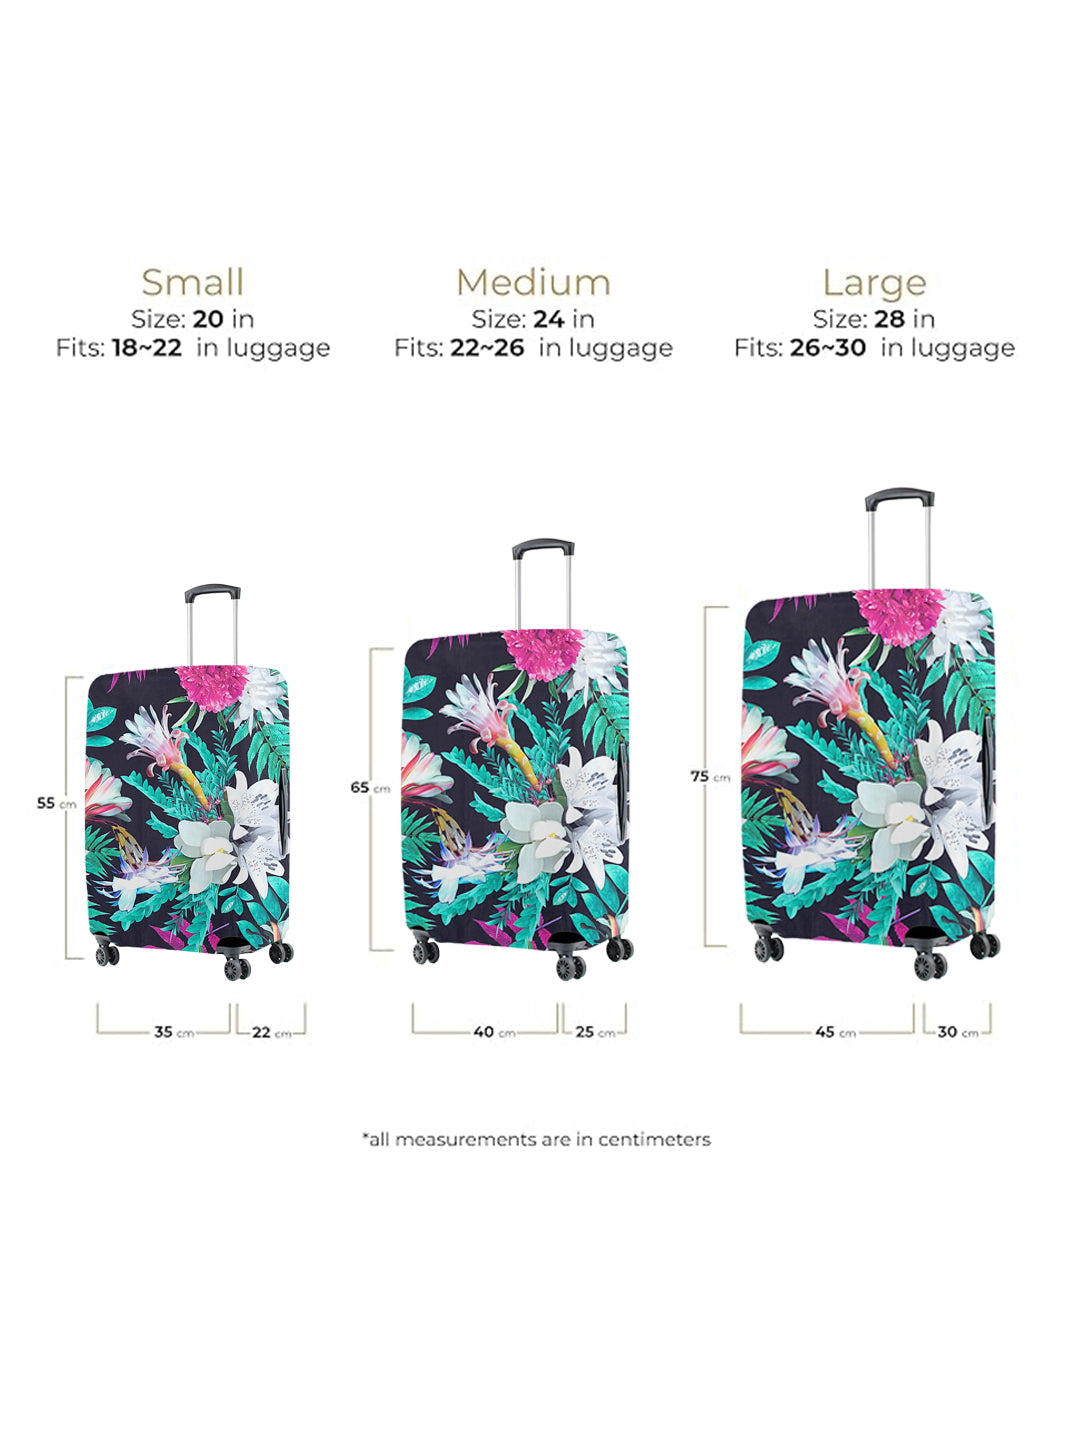 Stretchable Printed Protective Luggage Bag Cover Large- Multicolour